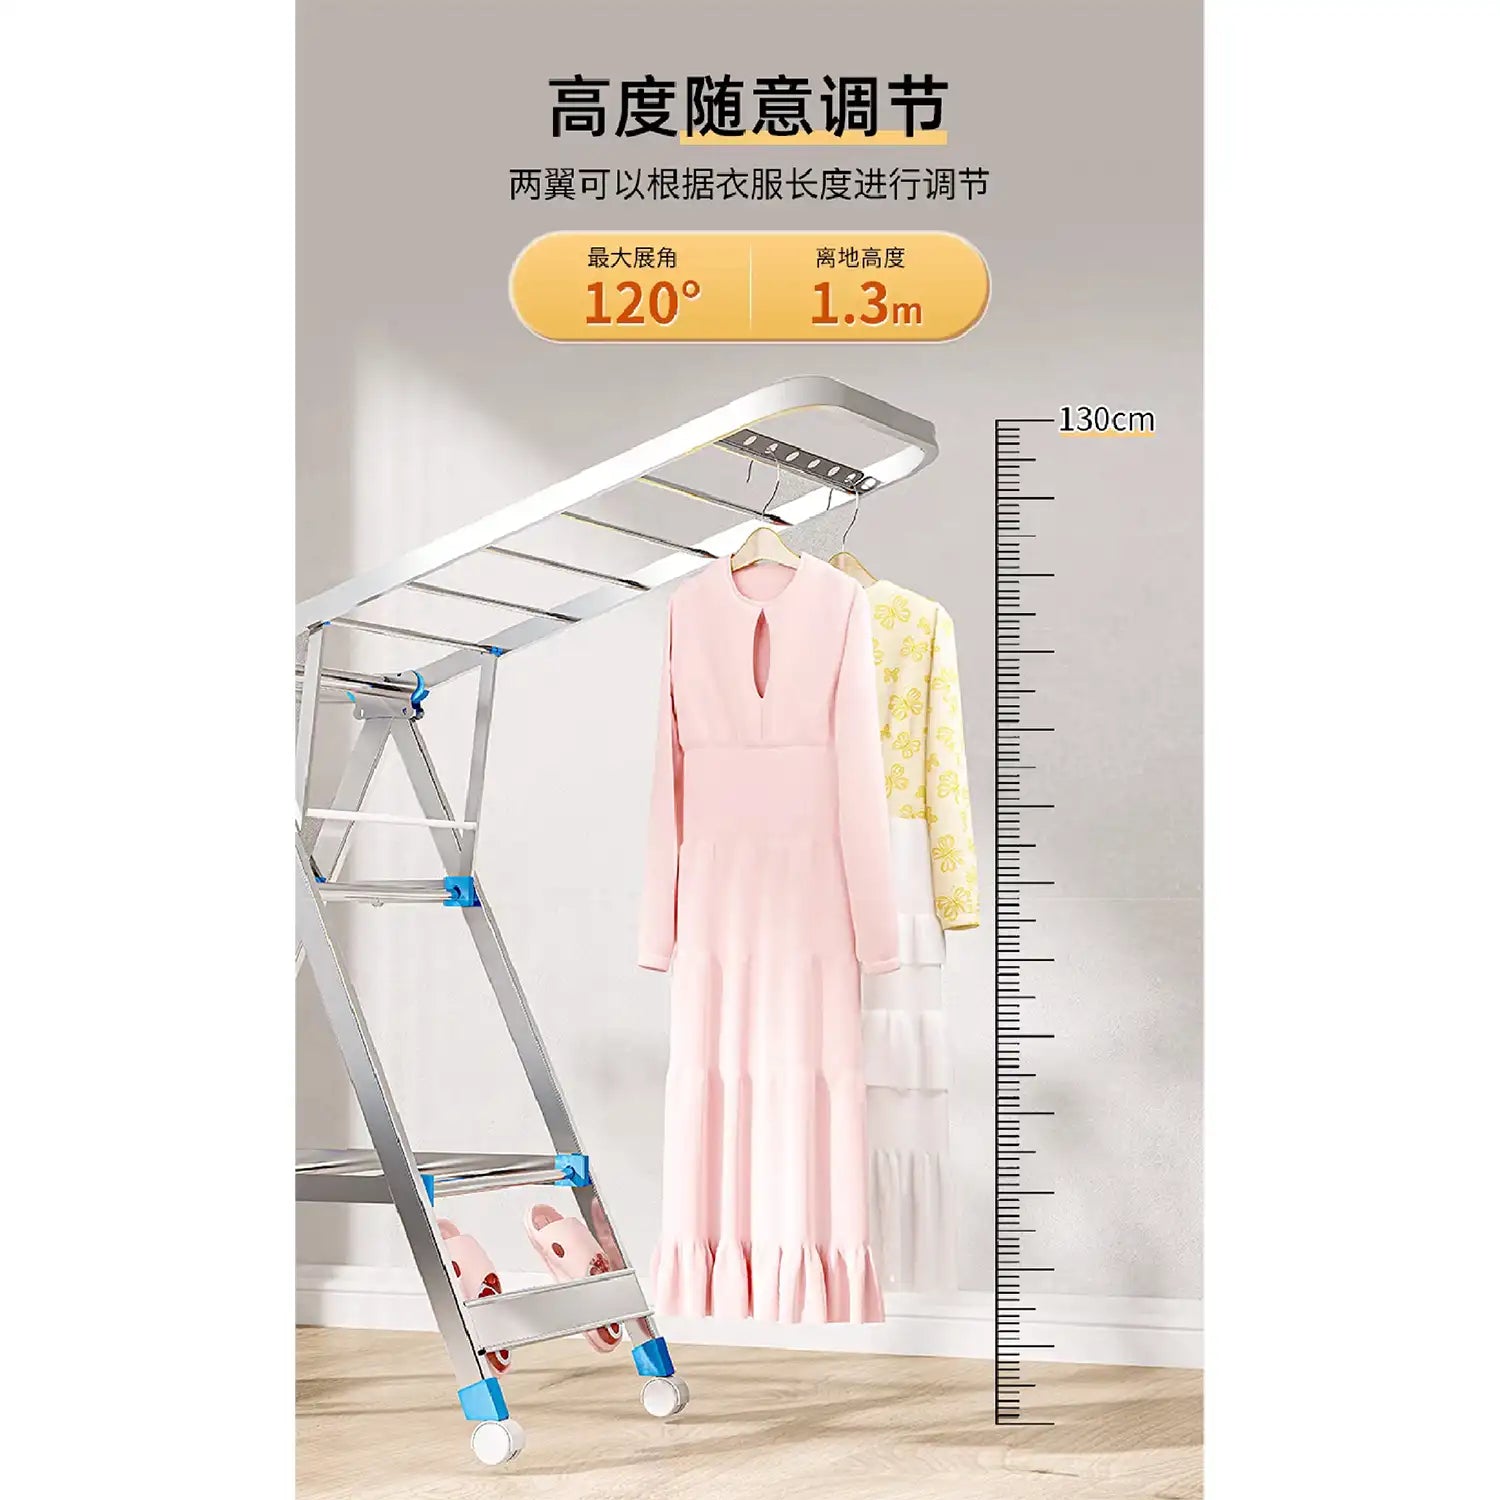 Enhanced Foldable Stainless Steel Clothes Hanger Rack - Space-Saving, Durable, Organize, Sturdy